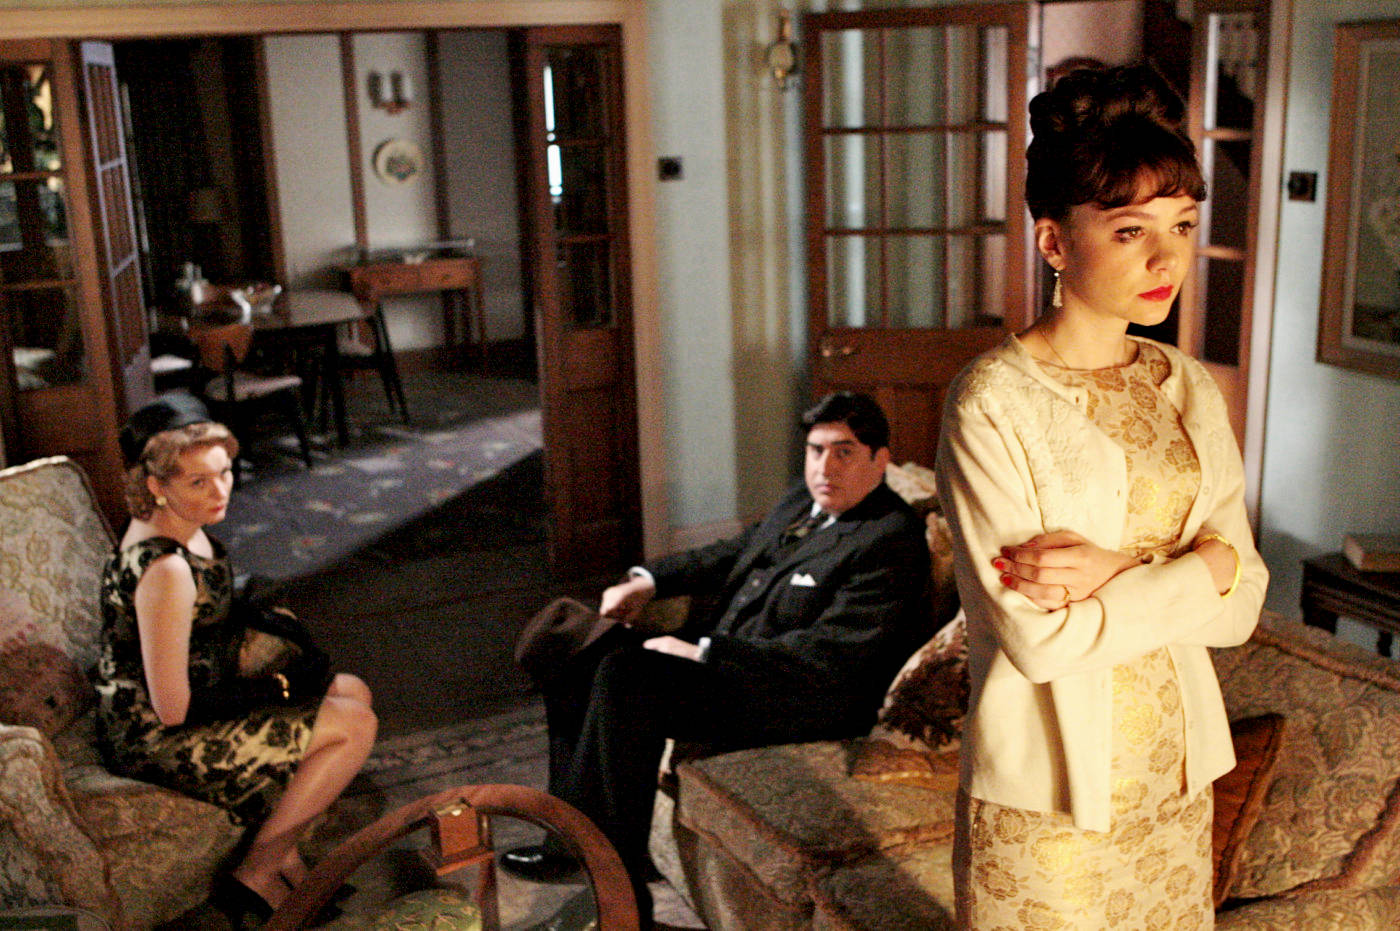 Cara Seymour, Alfred Molina and Carey Mulligan in Sony Pictures Classics' An Education (2009). Photo credit by Kerry Brown.